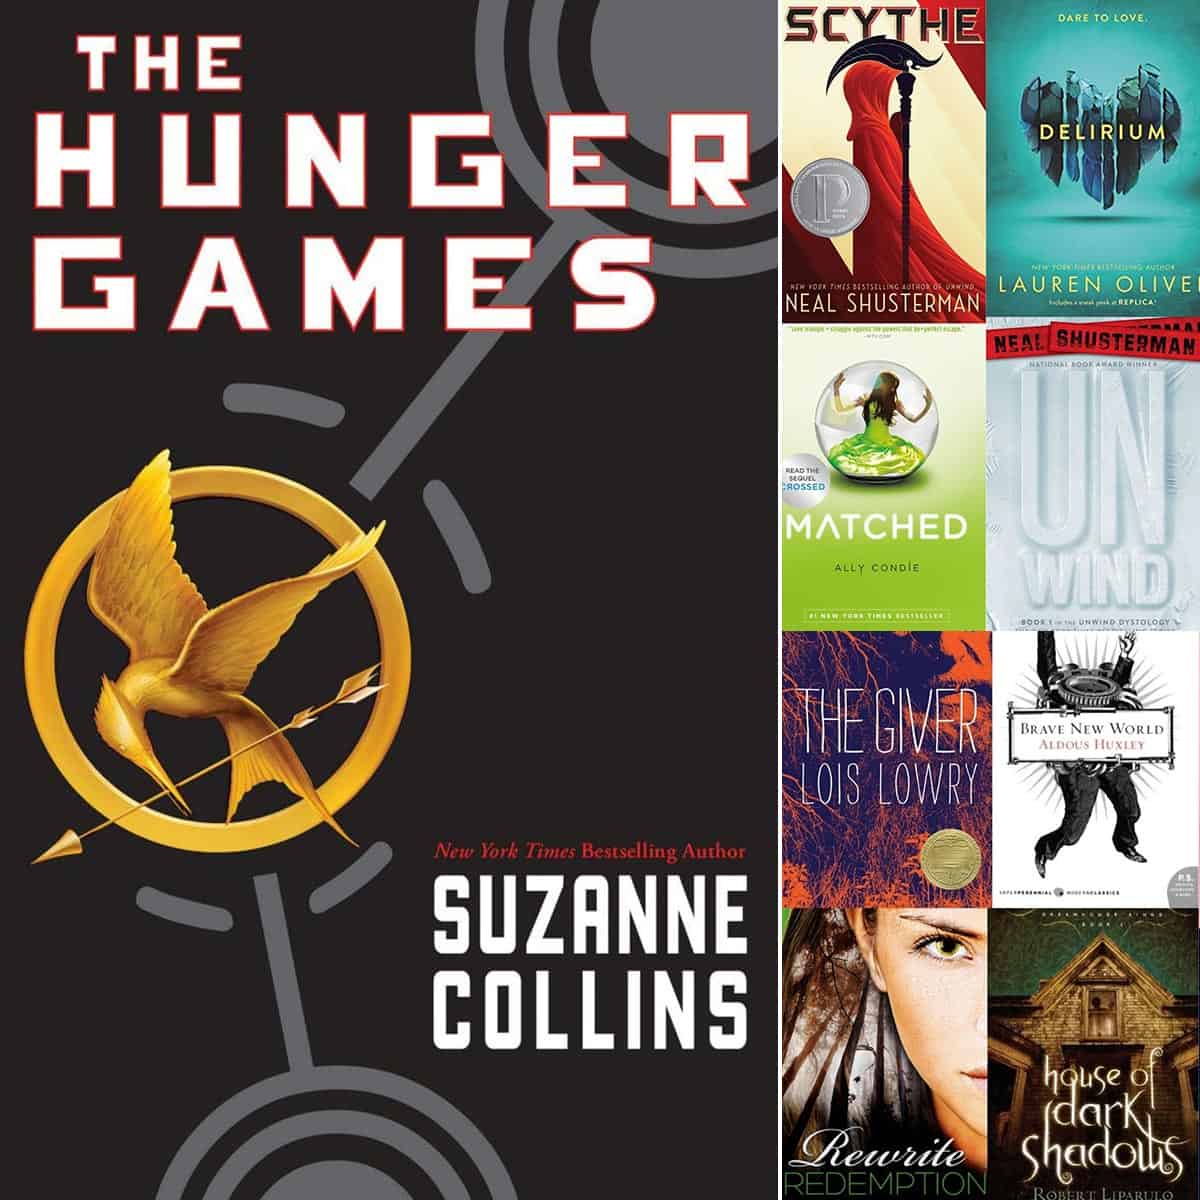 12 YA Dystopian Novels Books To Read If You Liked The Hunger Games!